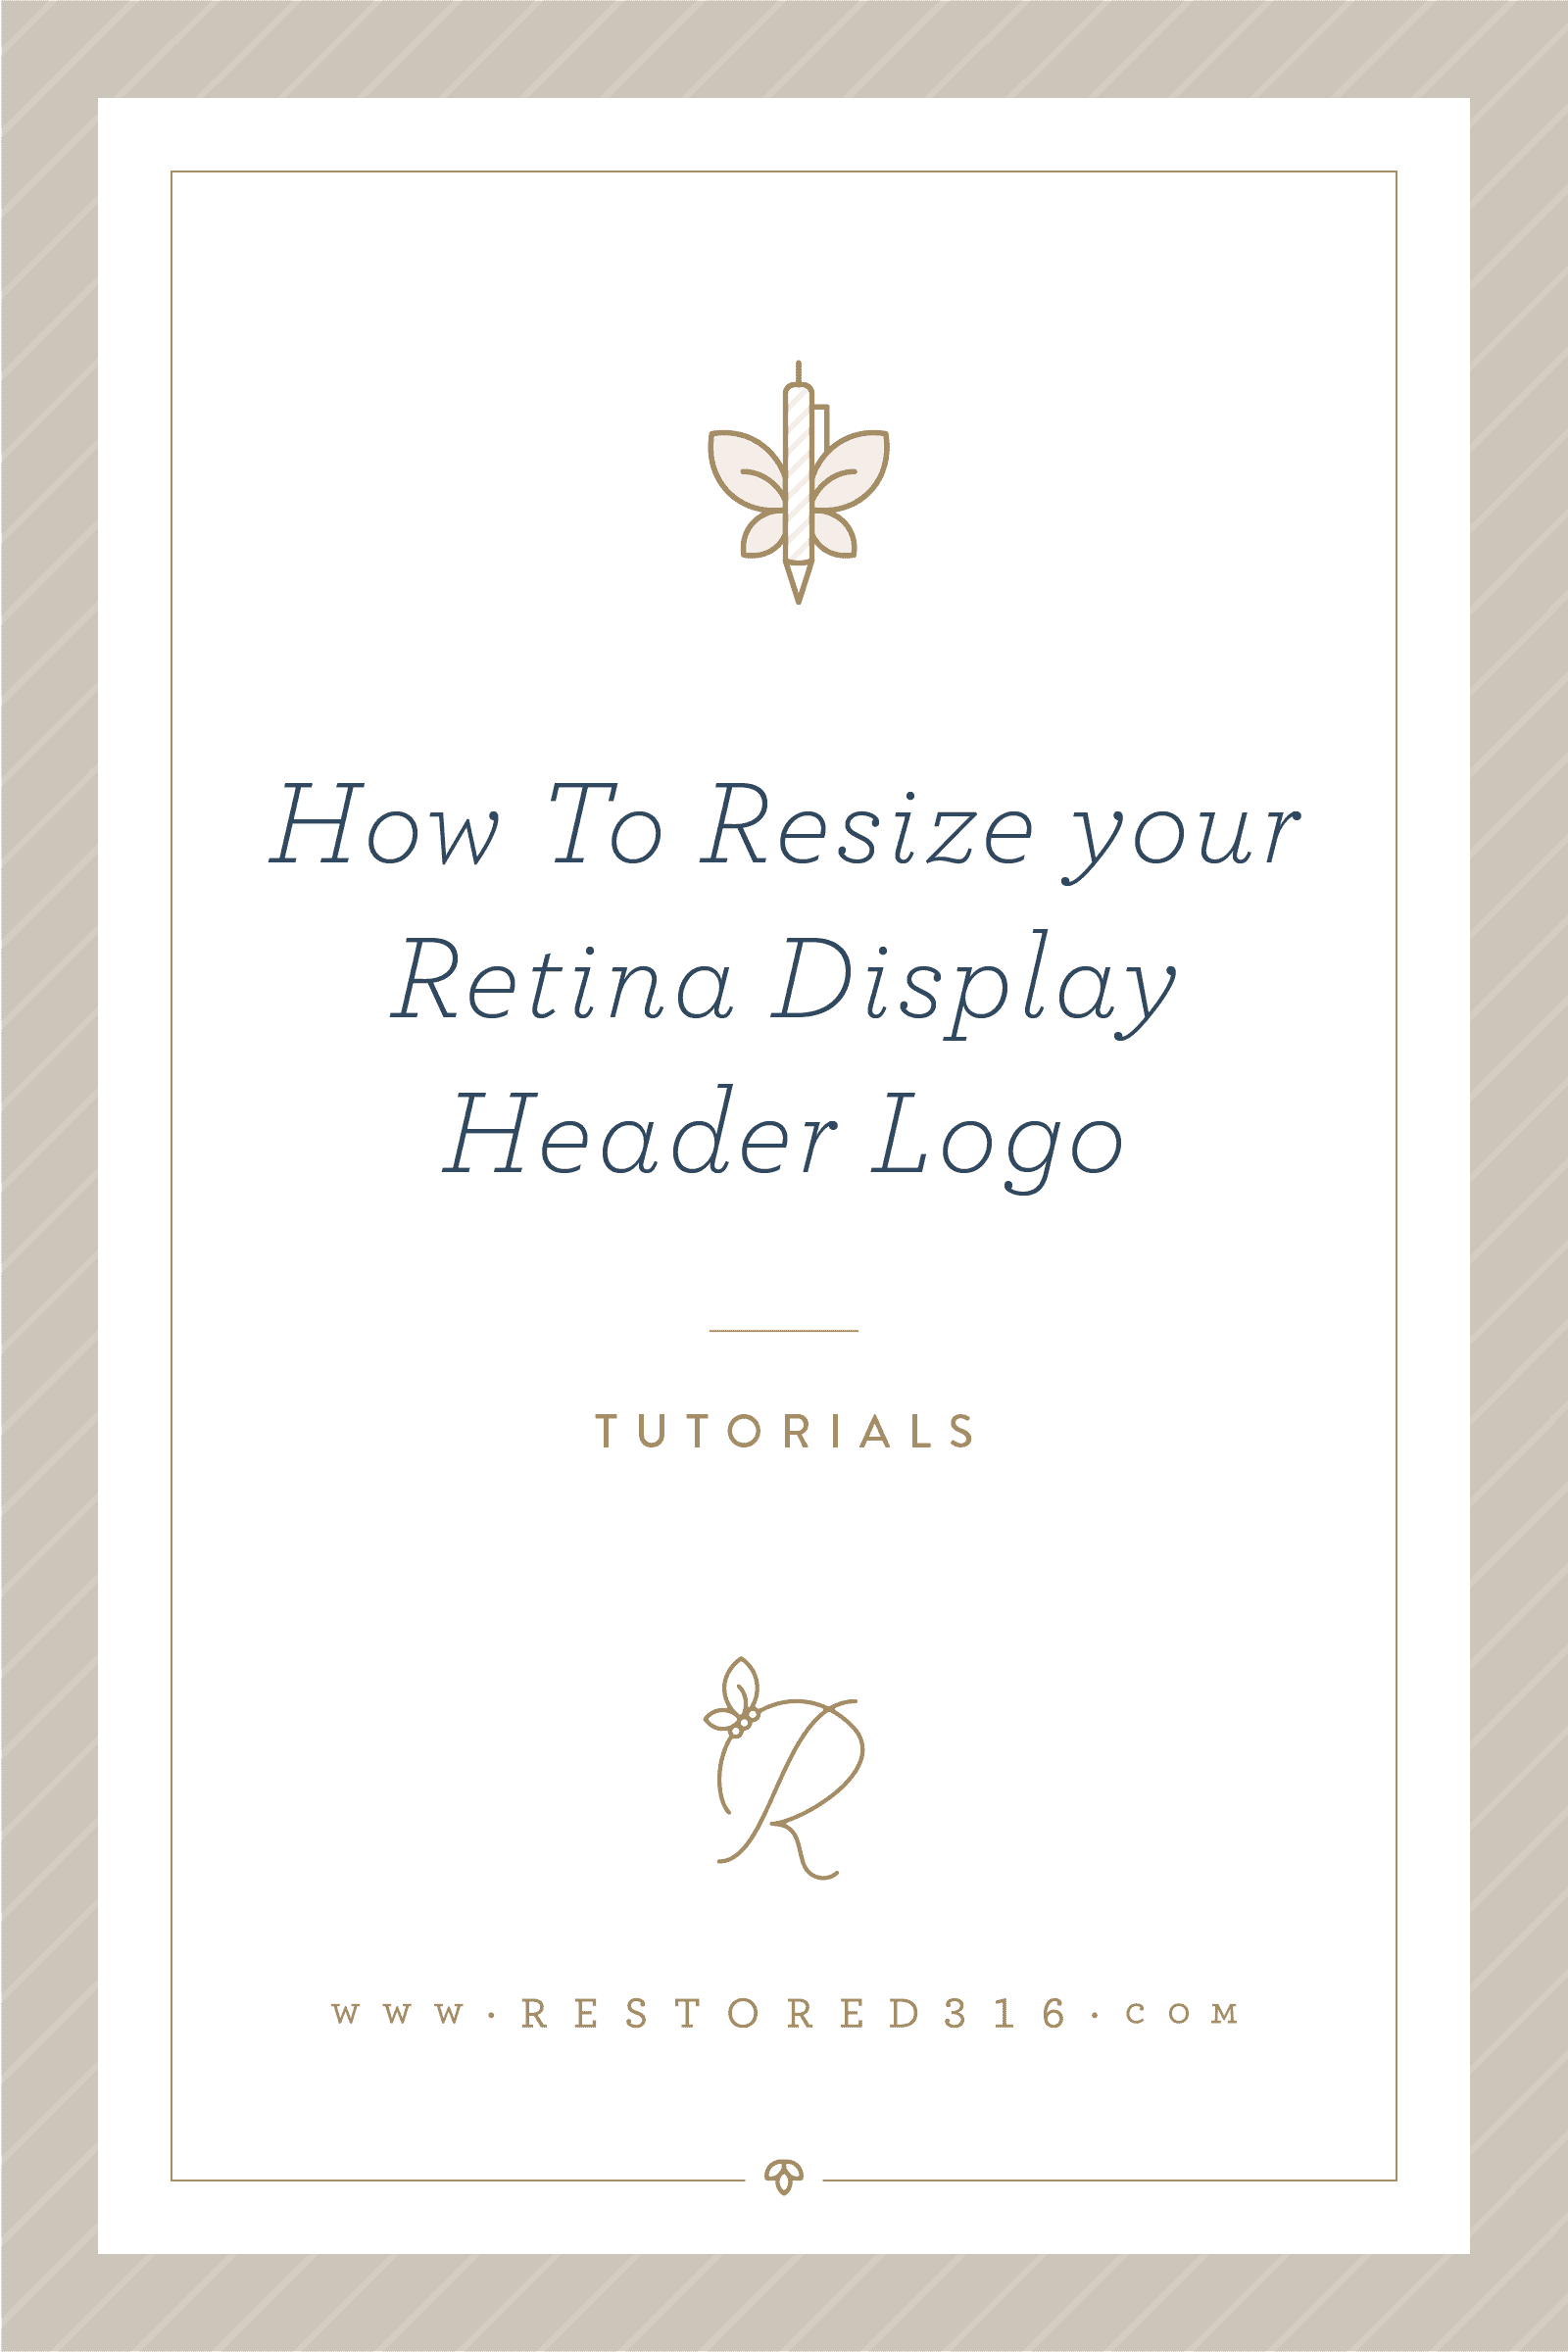 How to Resize Your Retina Display Header Logo